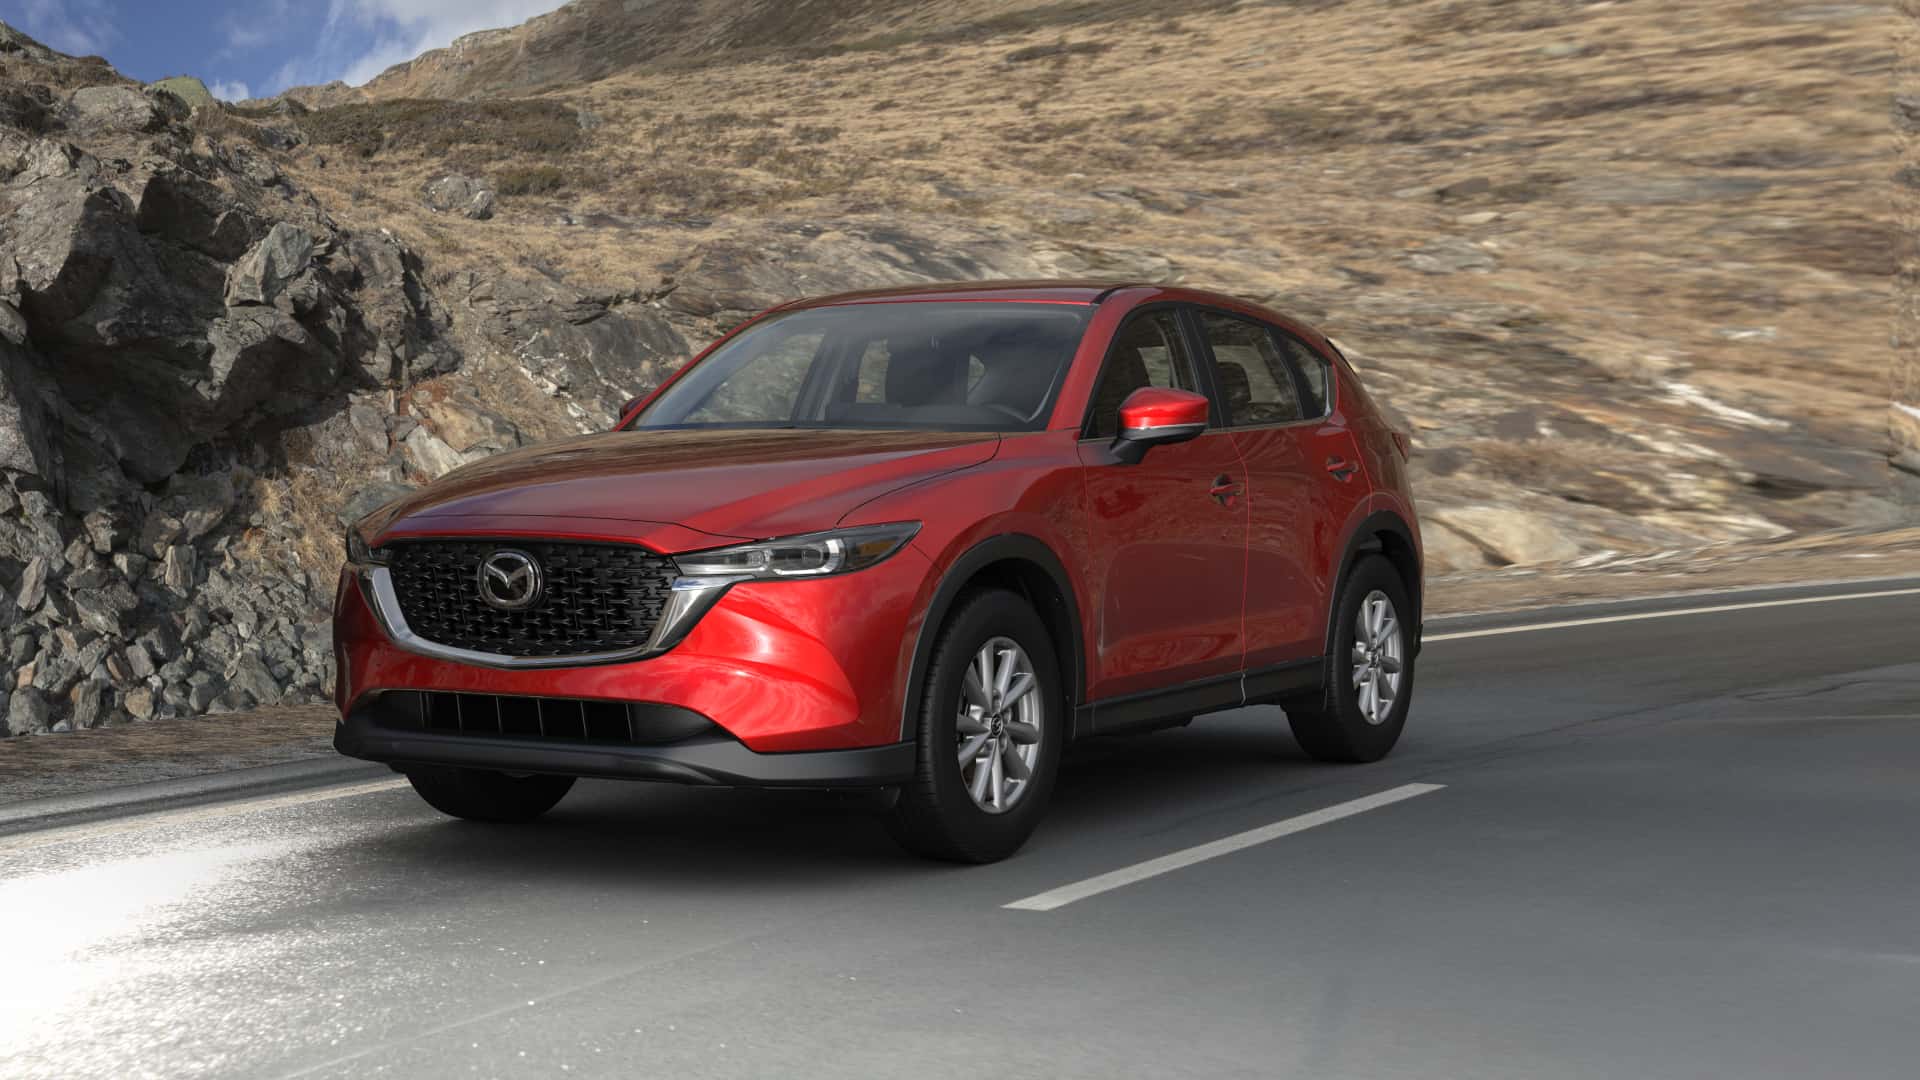 2023 Mazda CX-5 2.5 S Soul Red Crystal Metallic | Passport Mazda in Suitland MD